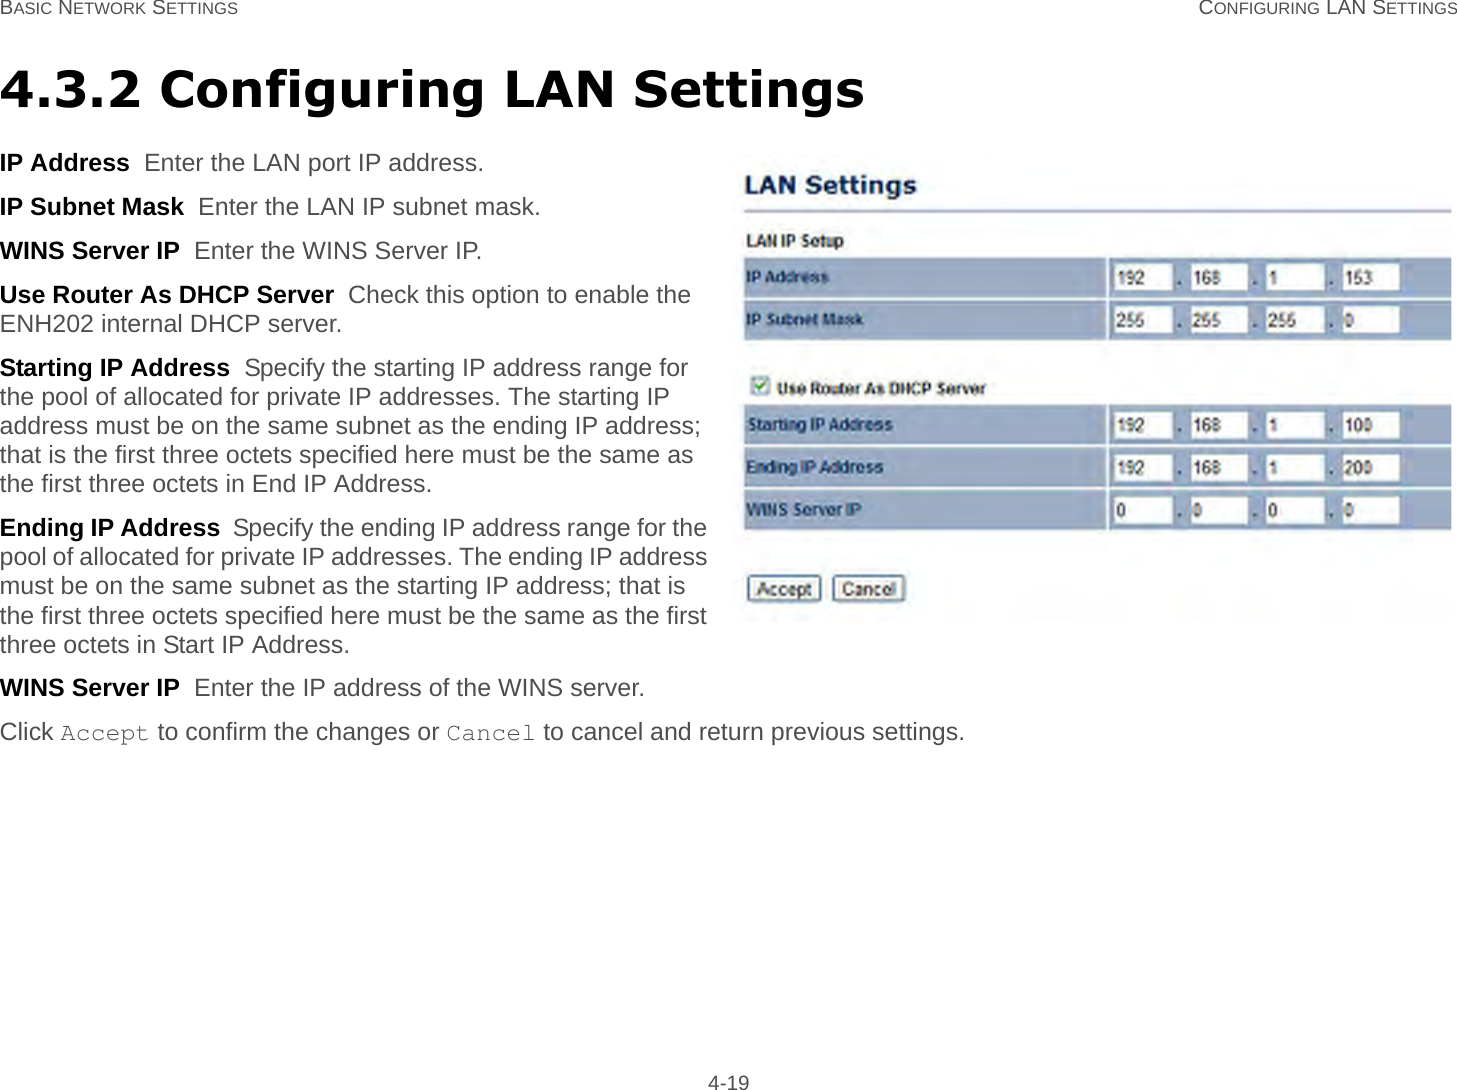 BASIC NETWORK SETTINGS CONFIGURING LAN SETTINGS 4-194.3.2 Configuring LAN SettingsIP Address  Enter the LAN port IP address.IP Subnet Mask  Enter the LAN IP subnet mask.WINS Server IP  Enter the WINS Server IP.Use Router As DHCP Server  Check this option to enable the ENH202 internal DHCP server.Starting IP Address  Specify the starting IP address range for the pool of allocated for private IP addresses. The starting IP address must be on the same subnet as the ending IP address; that is the first three octets specified here must be the same as the first three octets in End IP Address.Ending IP Address  Specify the ending IP address range for the pool of allocated for private IP addresses. The ending IP address must be on the same subnet as the starting IP address; that is the first three octets specified here must be the same as the first three octets in Start IP Address.WINS Server IP  Enter the IP address of the WINS server.Click Accept to confirm the changes or Cancel to cancel and return previous settings.